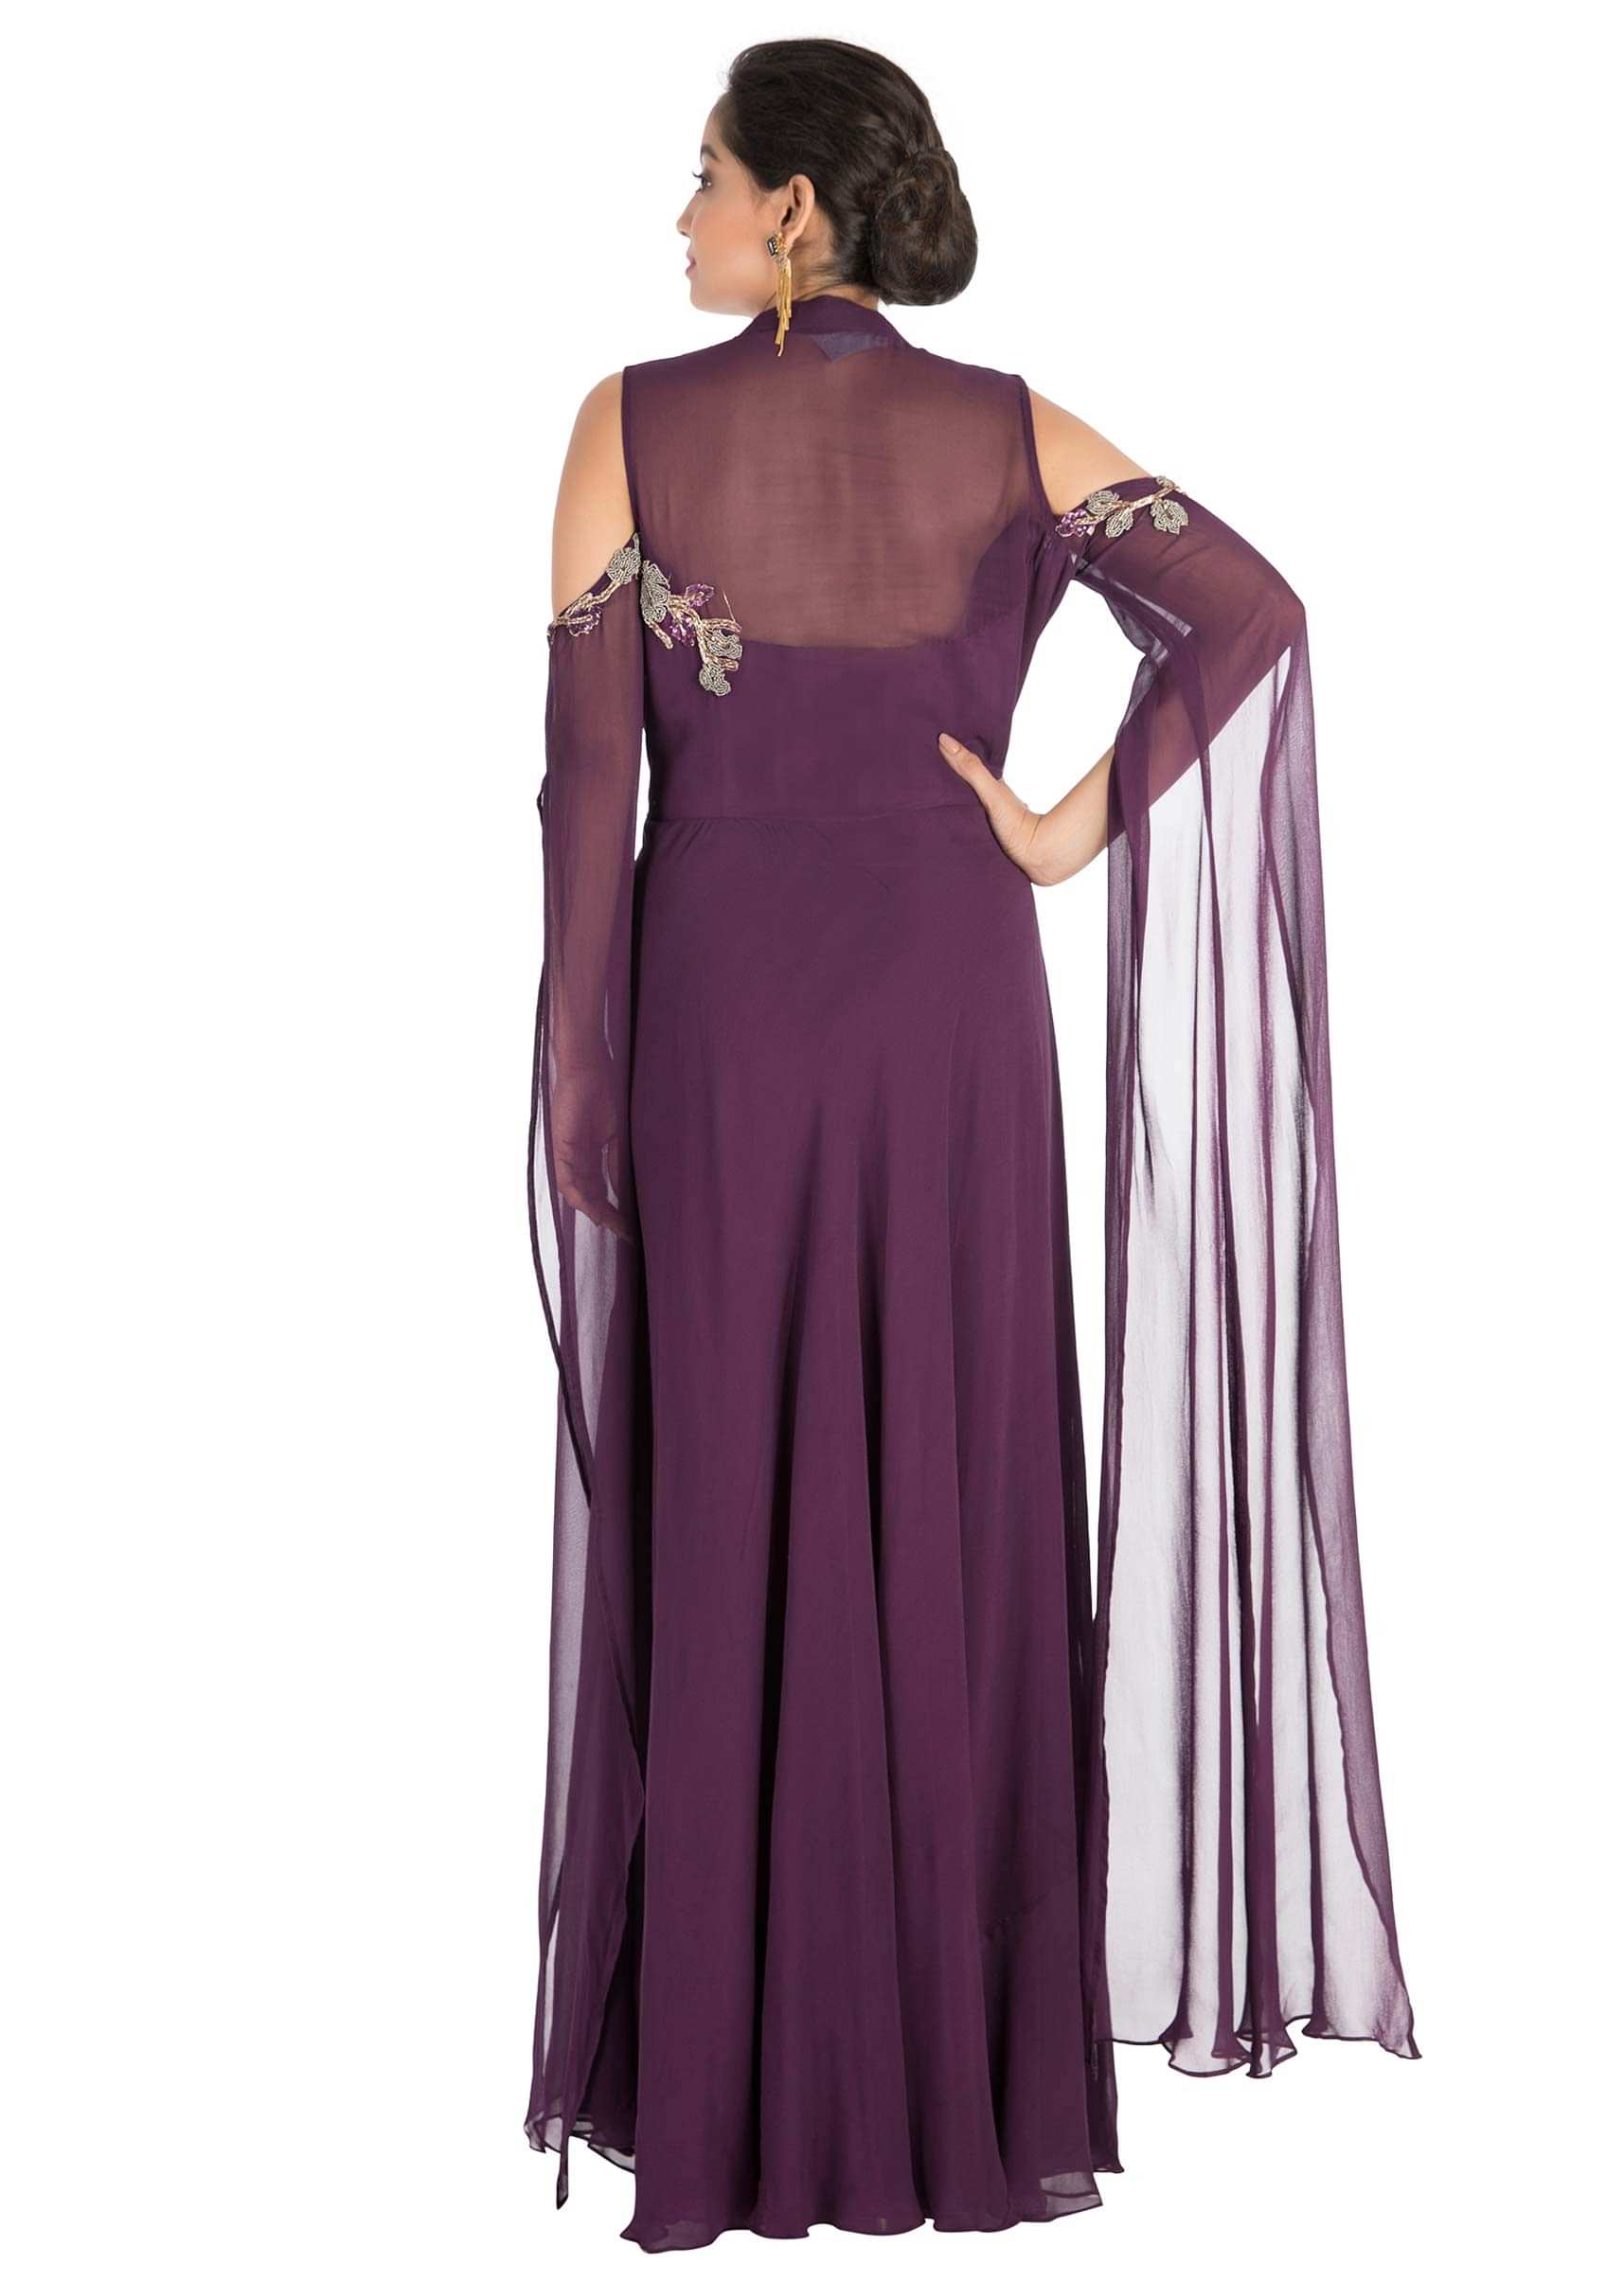 Hand embroidered Plum colour cold shoulder dress with long sleeves